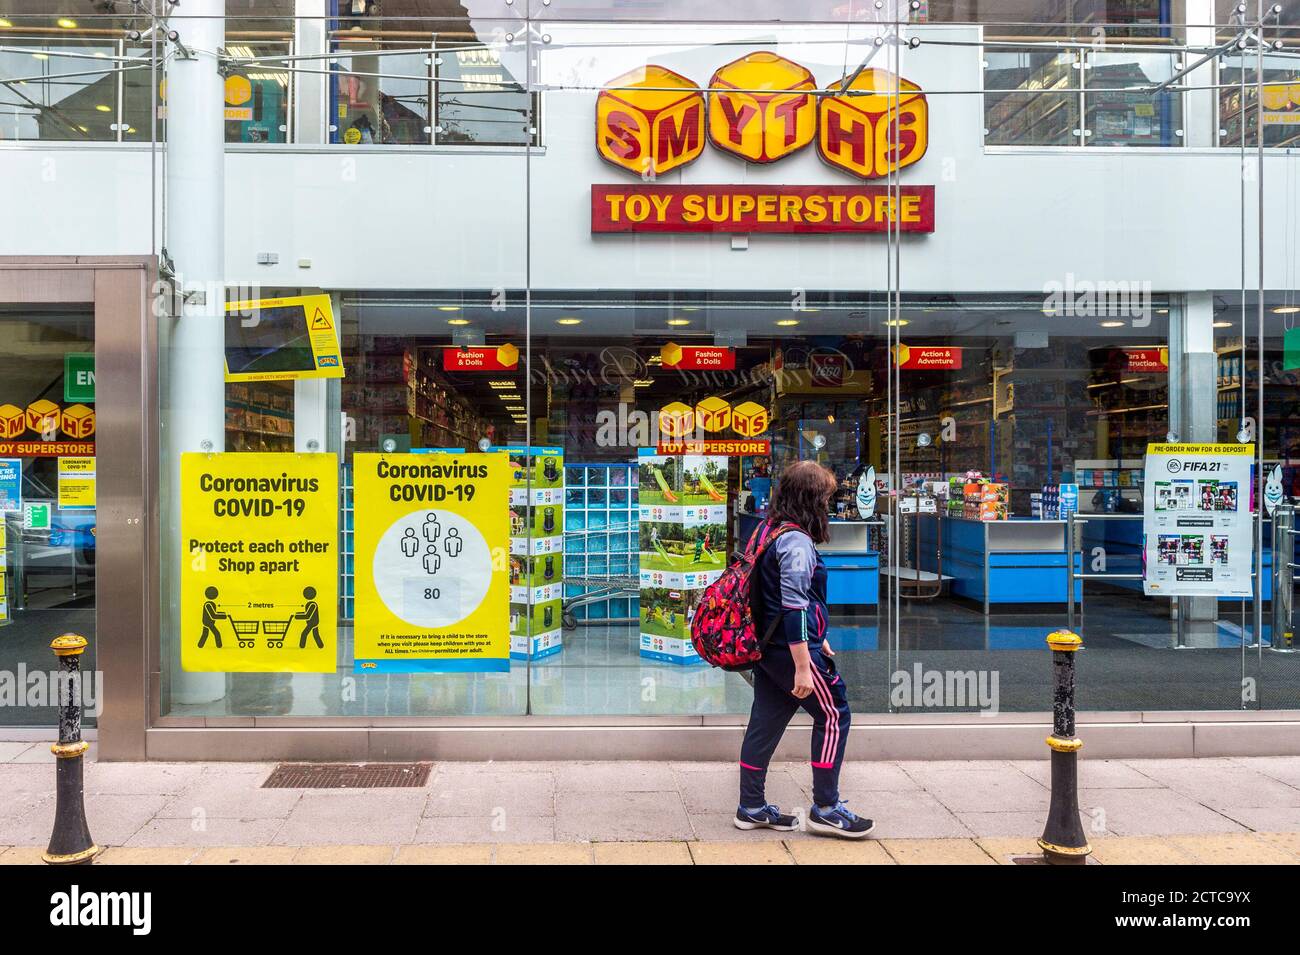 30 Smyths Toys Superstores Images, Stock Photos, 3D objects, & Vectors